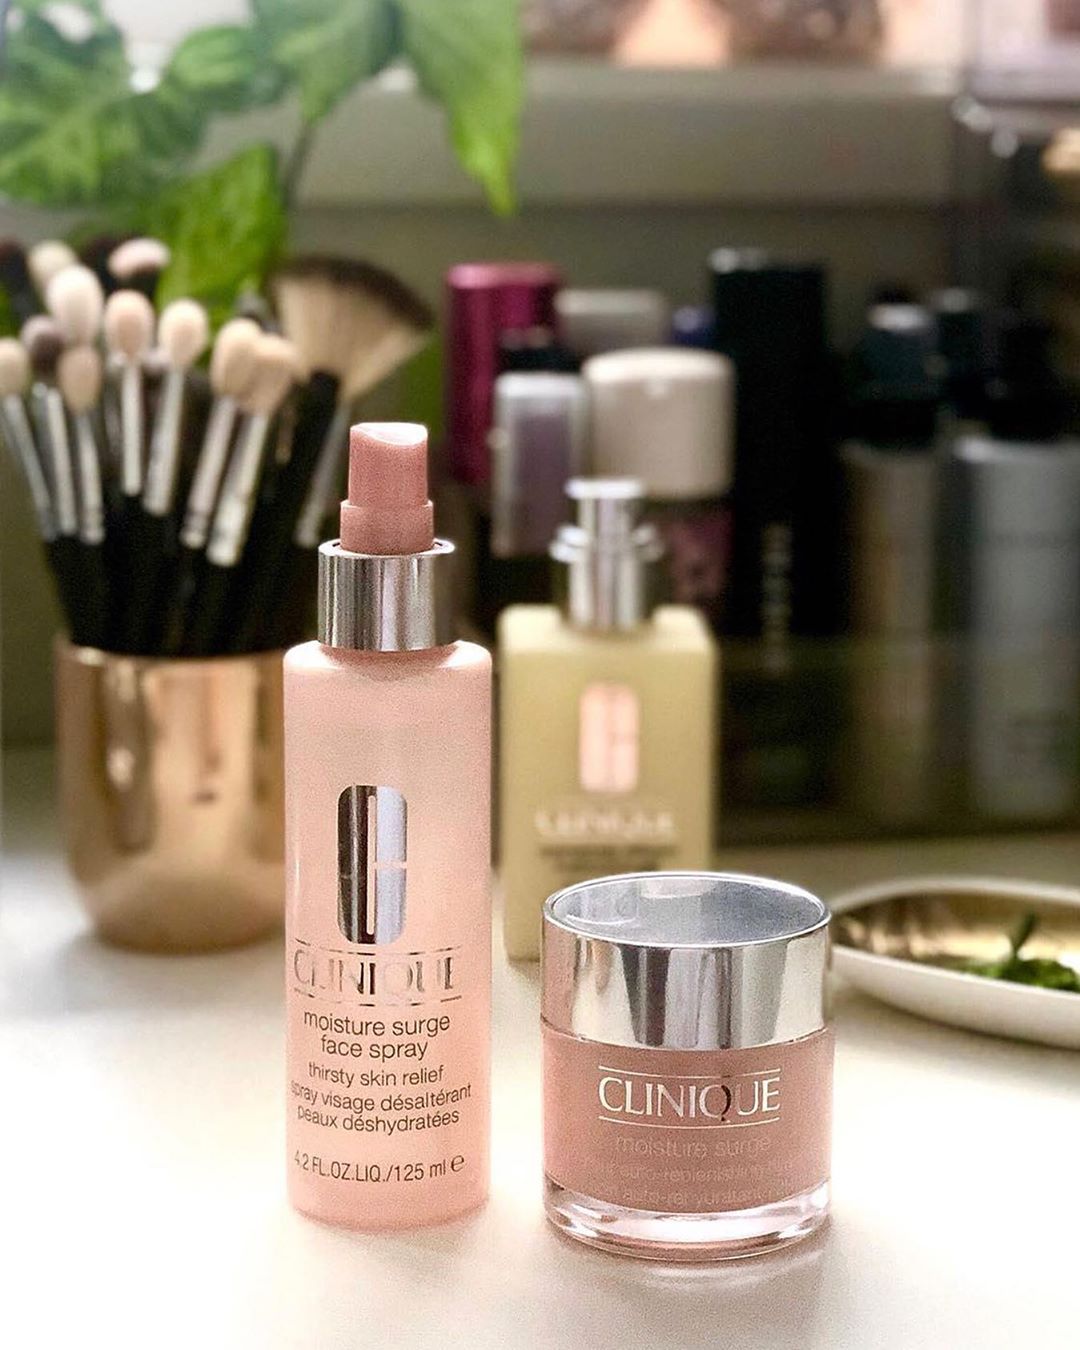 Clinique - Our fan-favorite hydration essentials are also the perfect prep for makeup! Tap once to shop Moisture Surge 72-Hour and Moisture Surge Face Spray✨💕

📸: @lipsticknlinguine #Clinique #beauty...